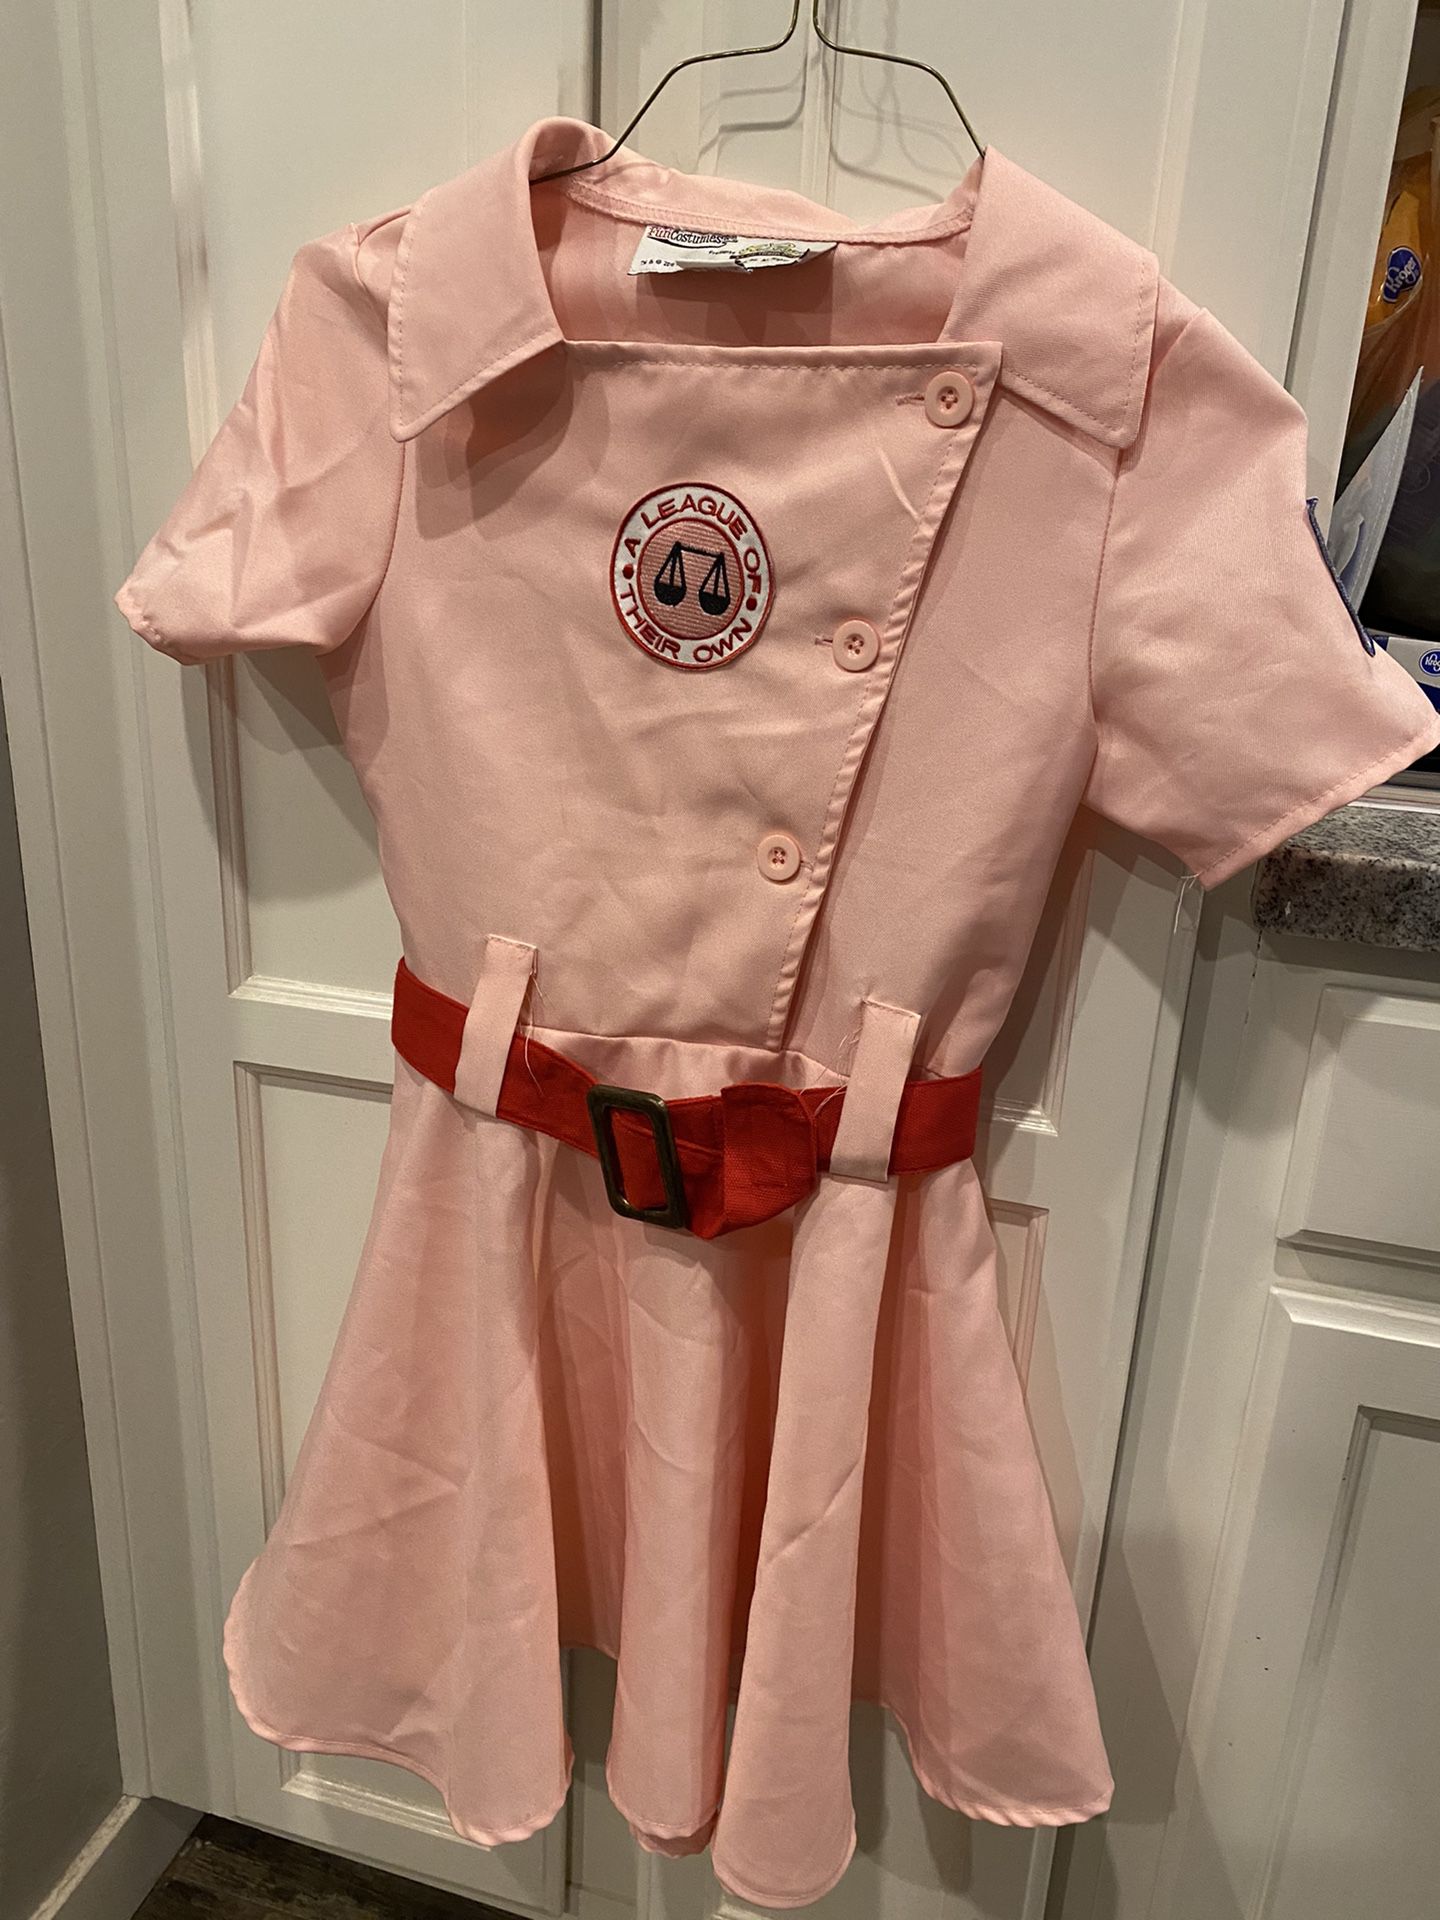 A League of Their Own Girls Costume